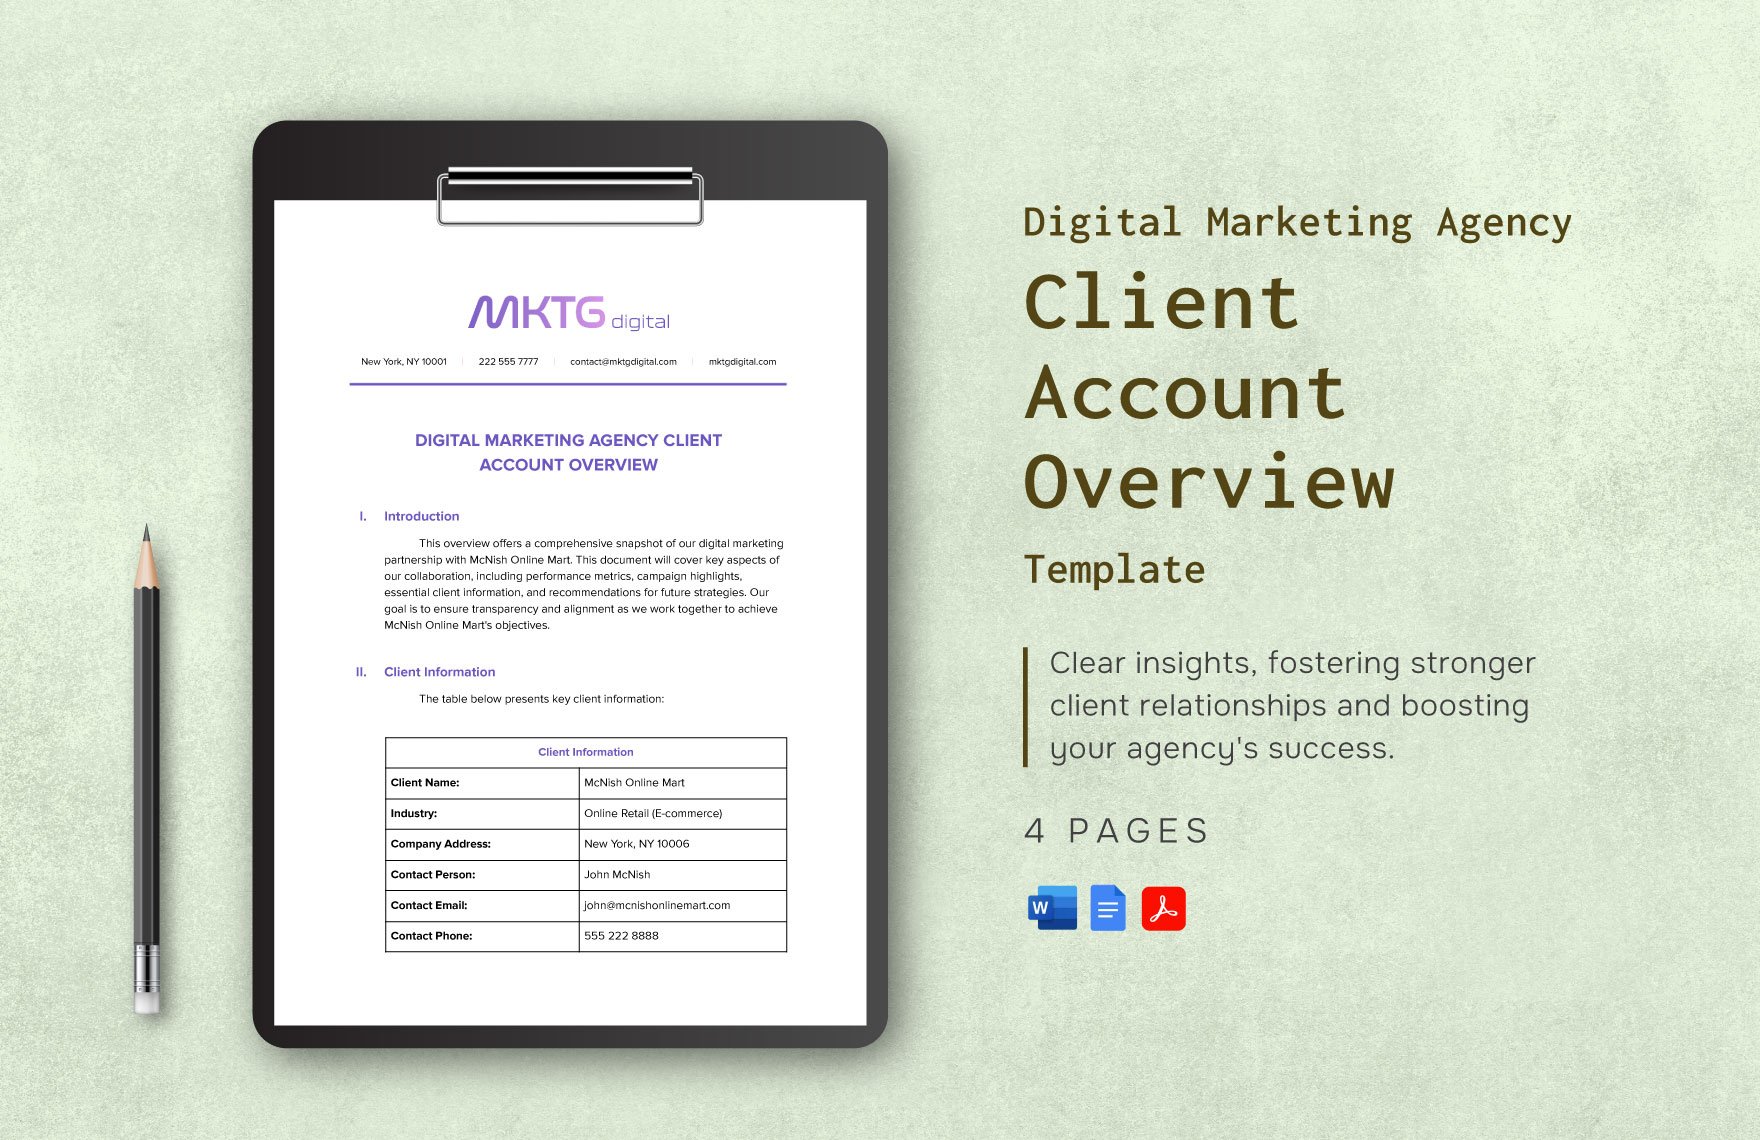 Digital Marketing Agency Client Account Overview Template